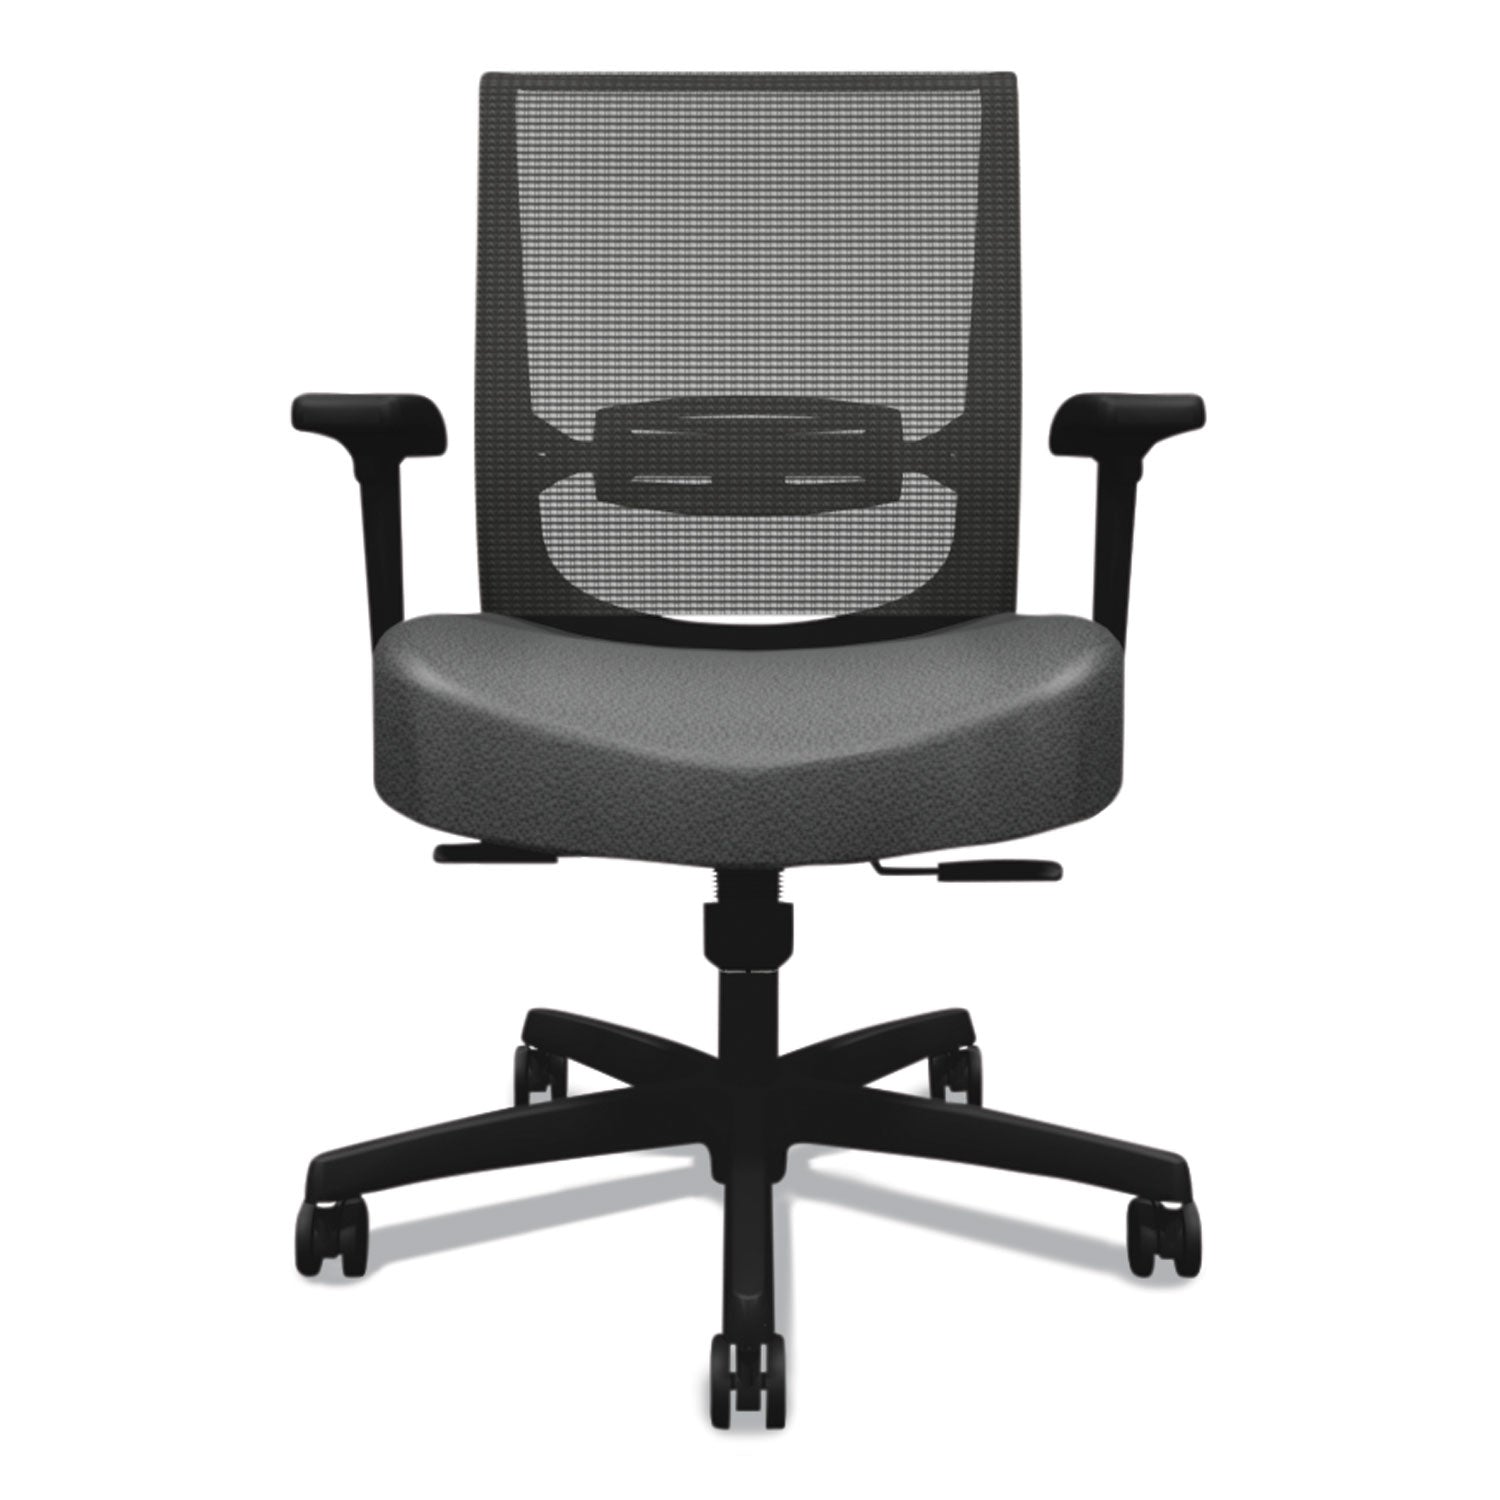 convergence-mid-back-task-chair-synchro-tilt-and-seat-glide-supports-up-to-275-lb-iron-ore-seat-black-back-base_honcmy1acu19 - 2